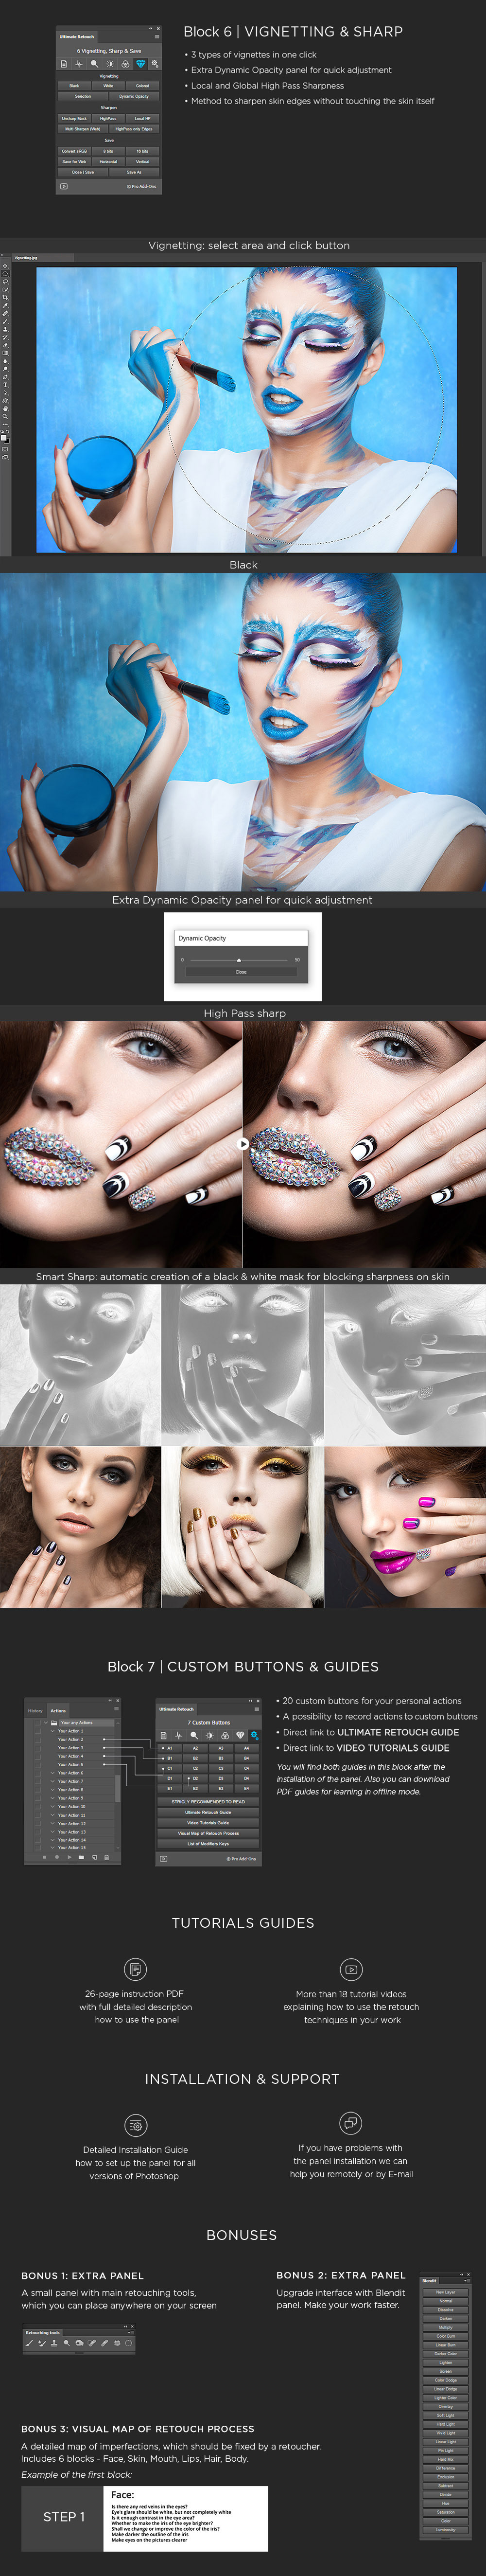 retouch retouching  retouch panel frequensy separation Digital Make Up lightroom presets photoshop actions retouch presets beauty retouch Photoshop Panel